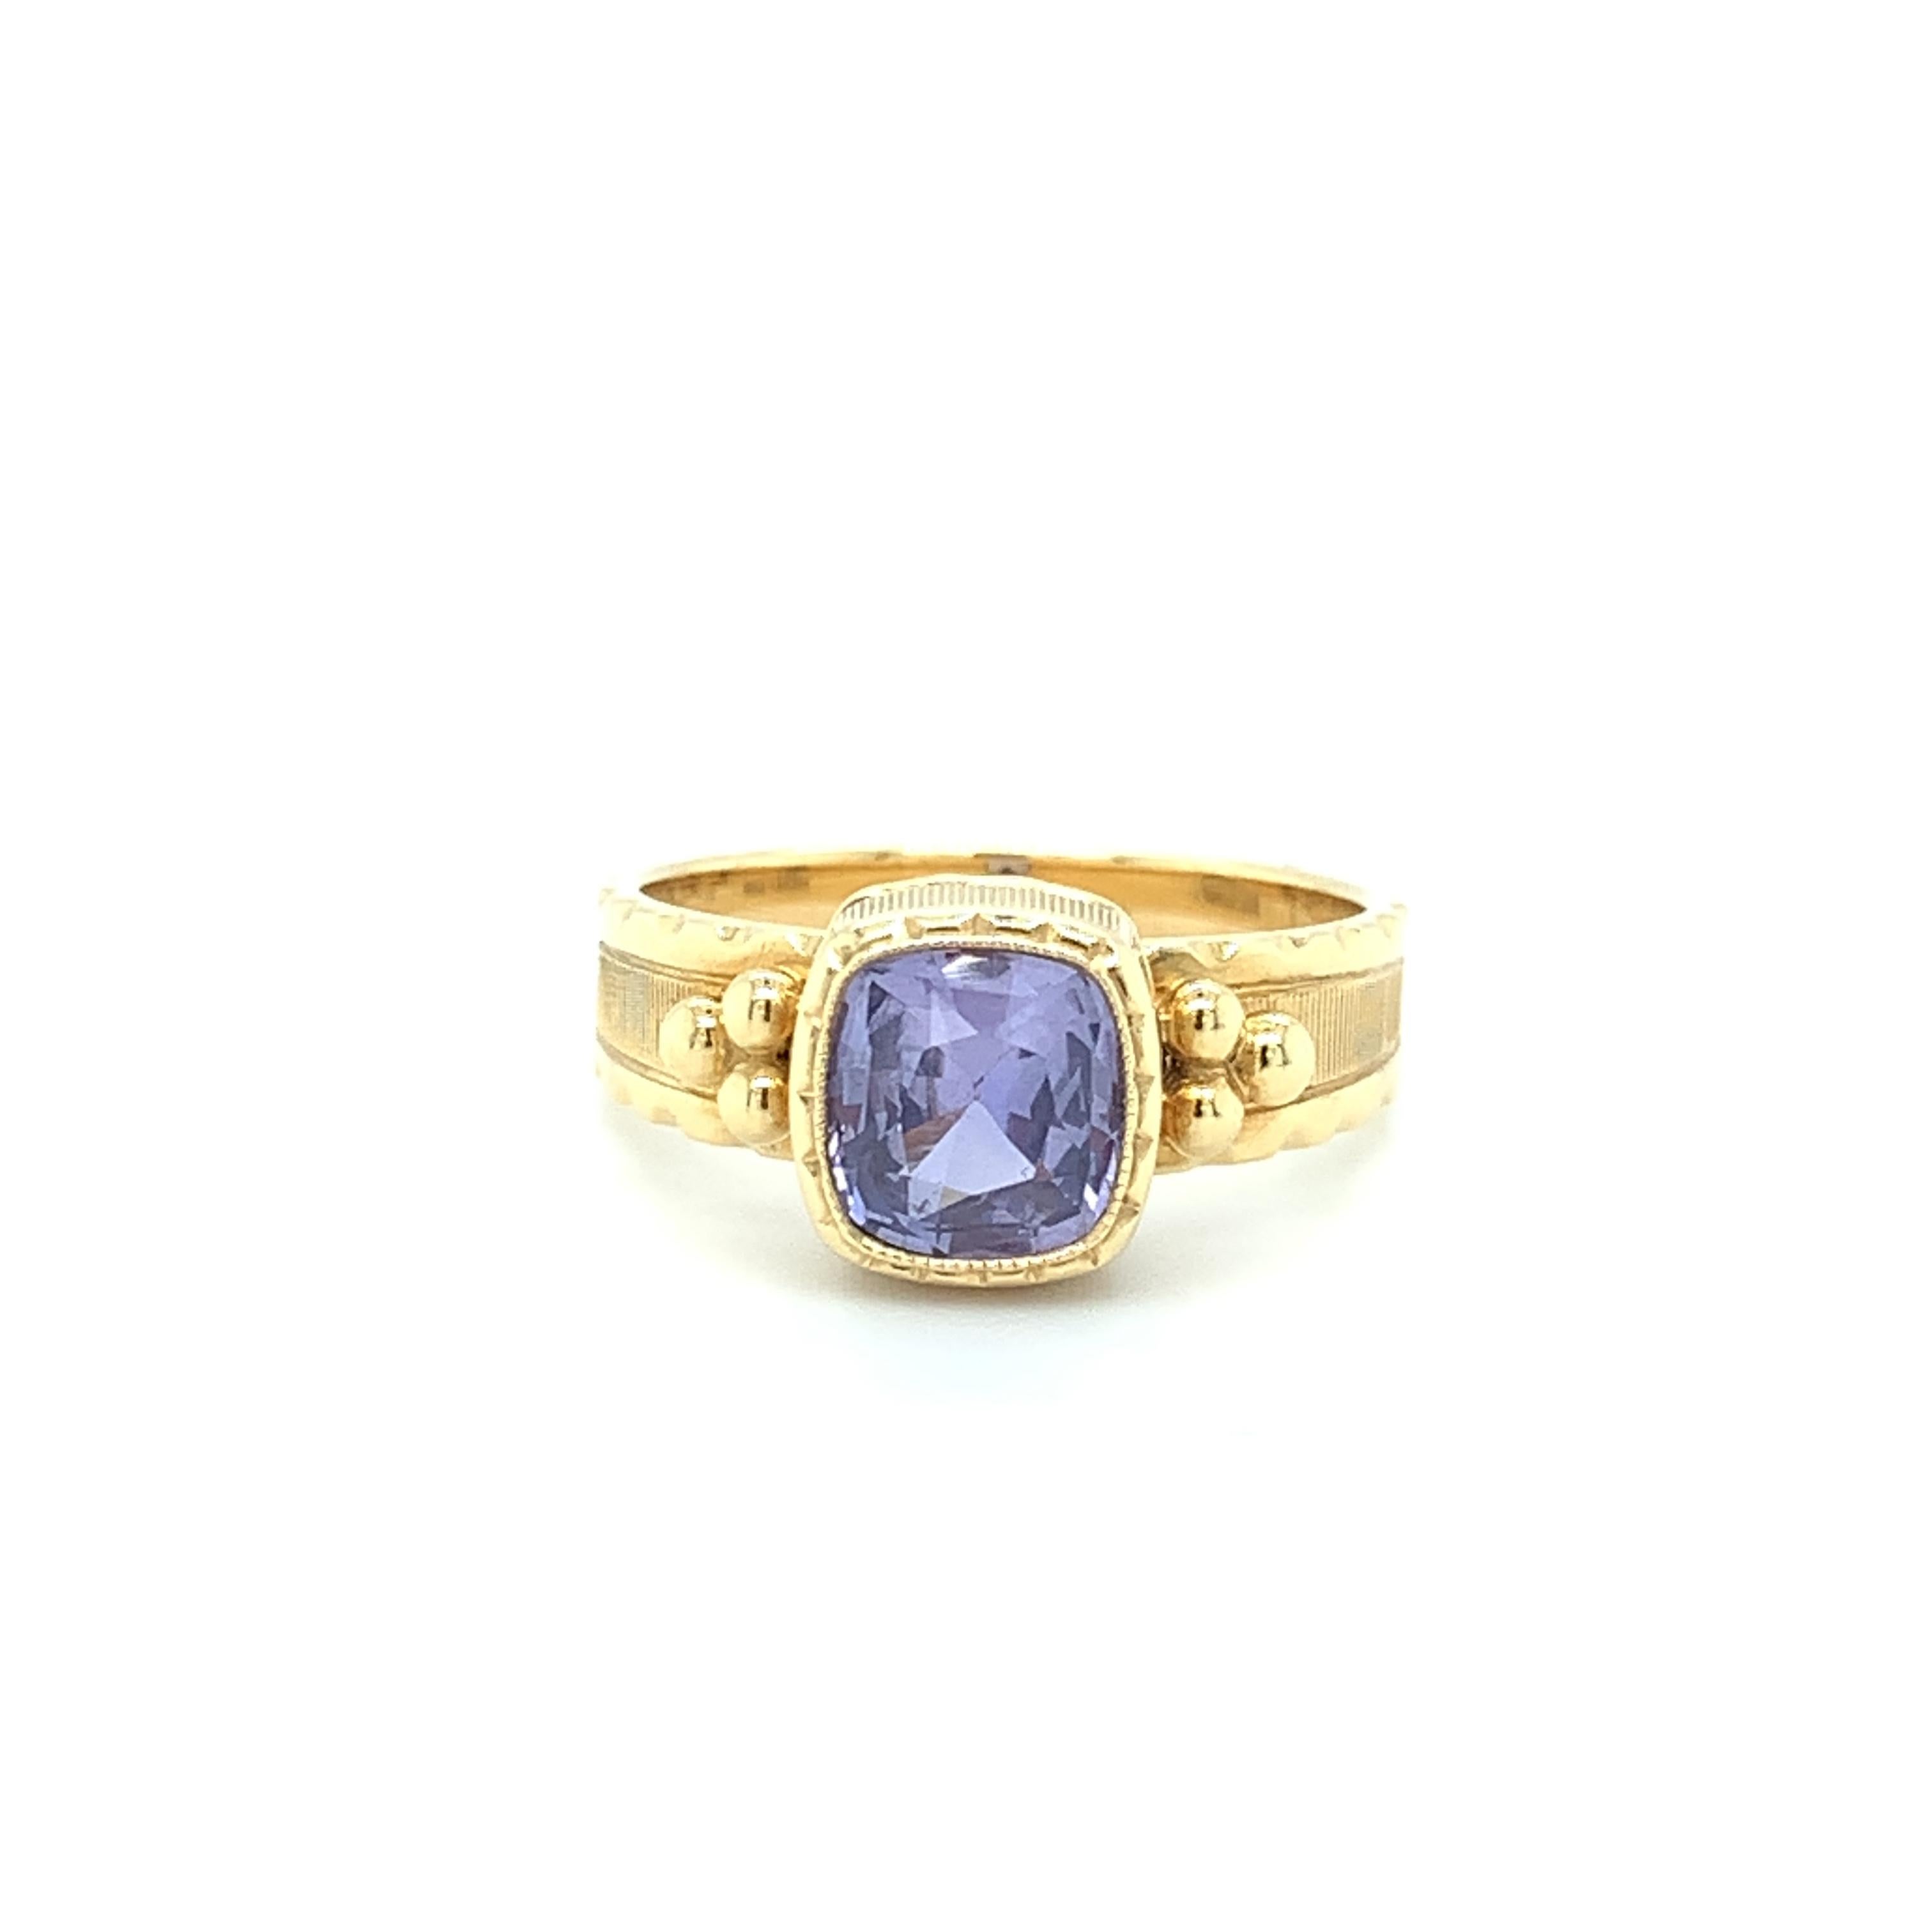 This pretty ring features a lively 1.90 carat fancy color violet sapphire that has been set in a handmade 18k yellow gold bezel. The sapphire is cushion shaped and it is a beautiful shade of bright, bluish purple. It is accented on both sides with